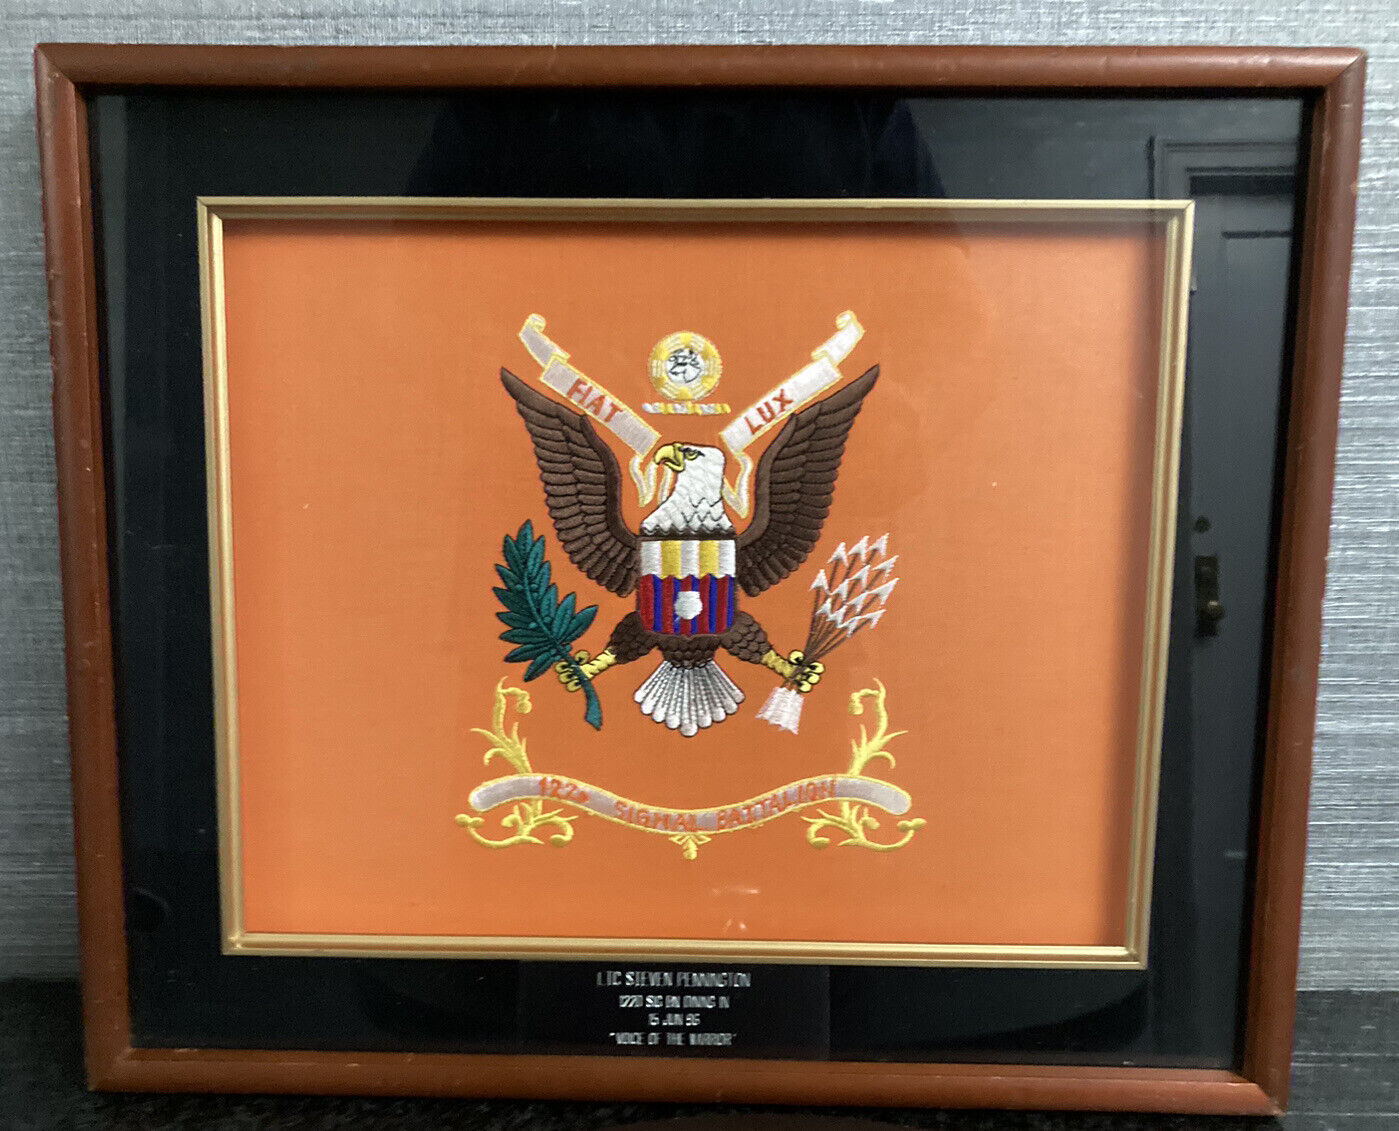 VOICE OF THE WARRIOR 122D SIGNAL BATTALION Embroidered Emblem Framed 18.5 x 15.5